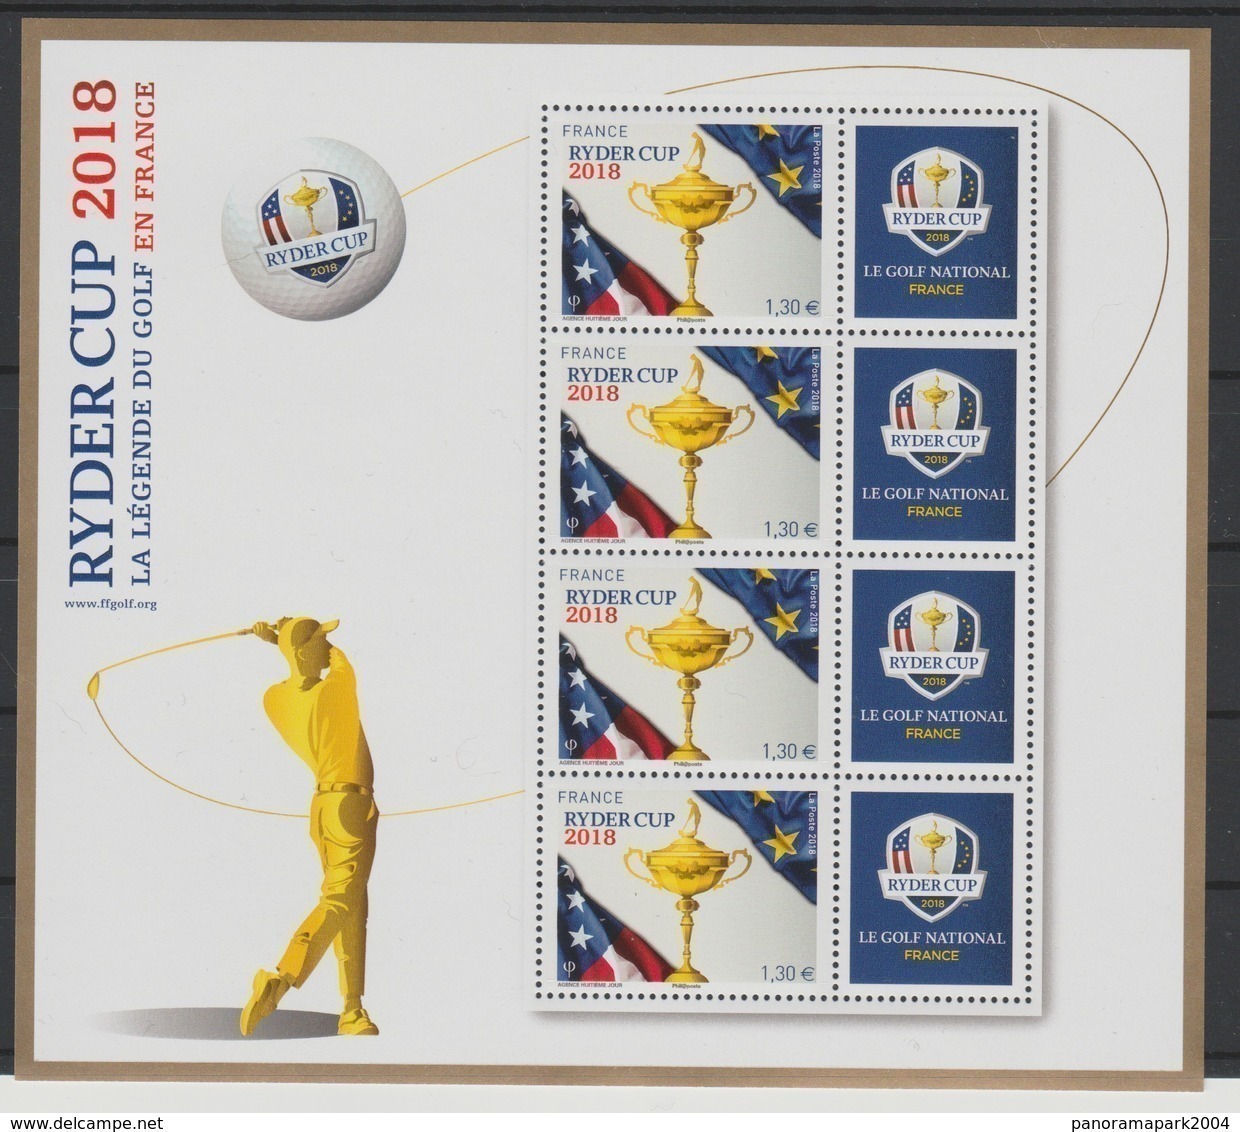 France 2018 - BF YT N°142 Mini-feuillet Bloc 4 Timbres Ryder Cup Golf LUXE MNH RARE ! Tirage 30 000 - Ungebraucht